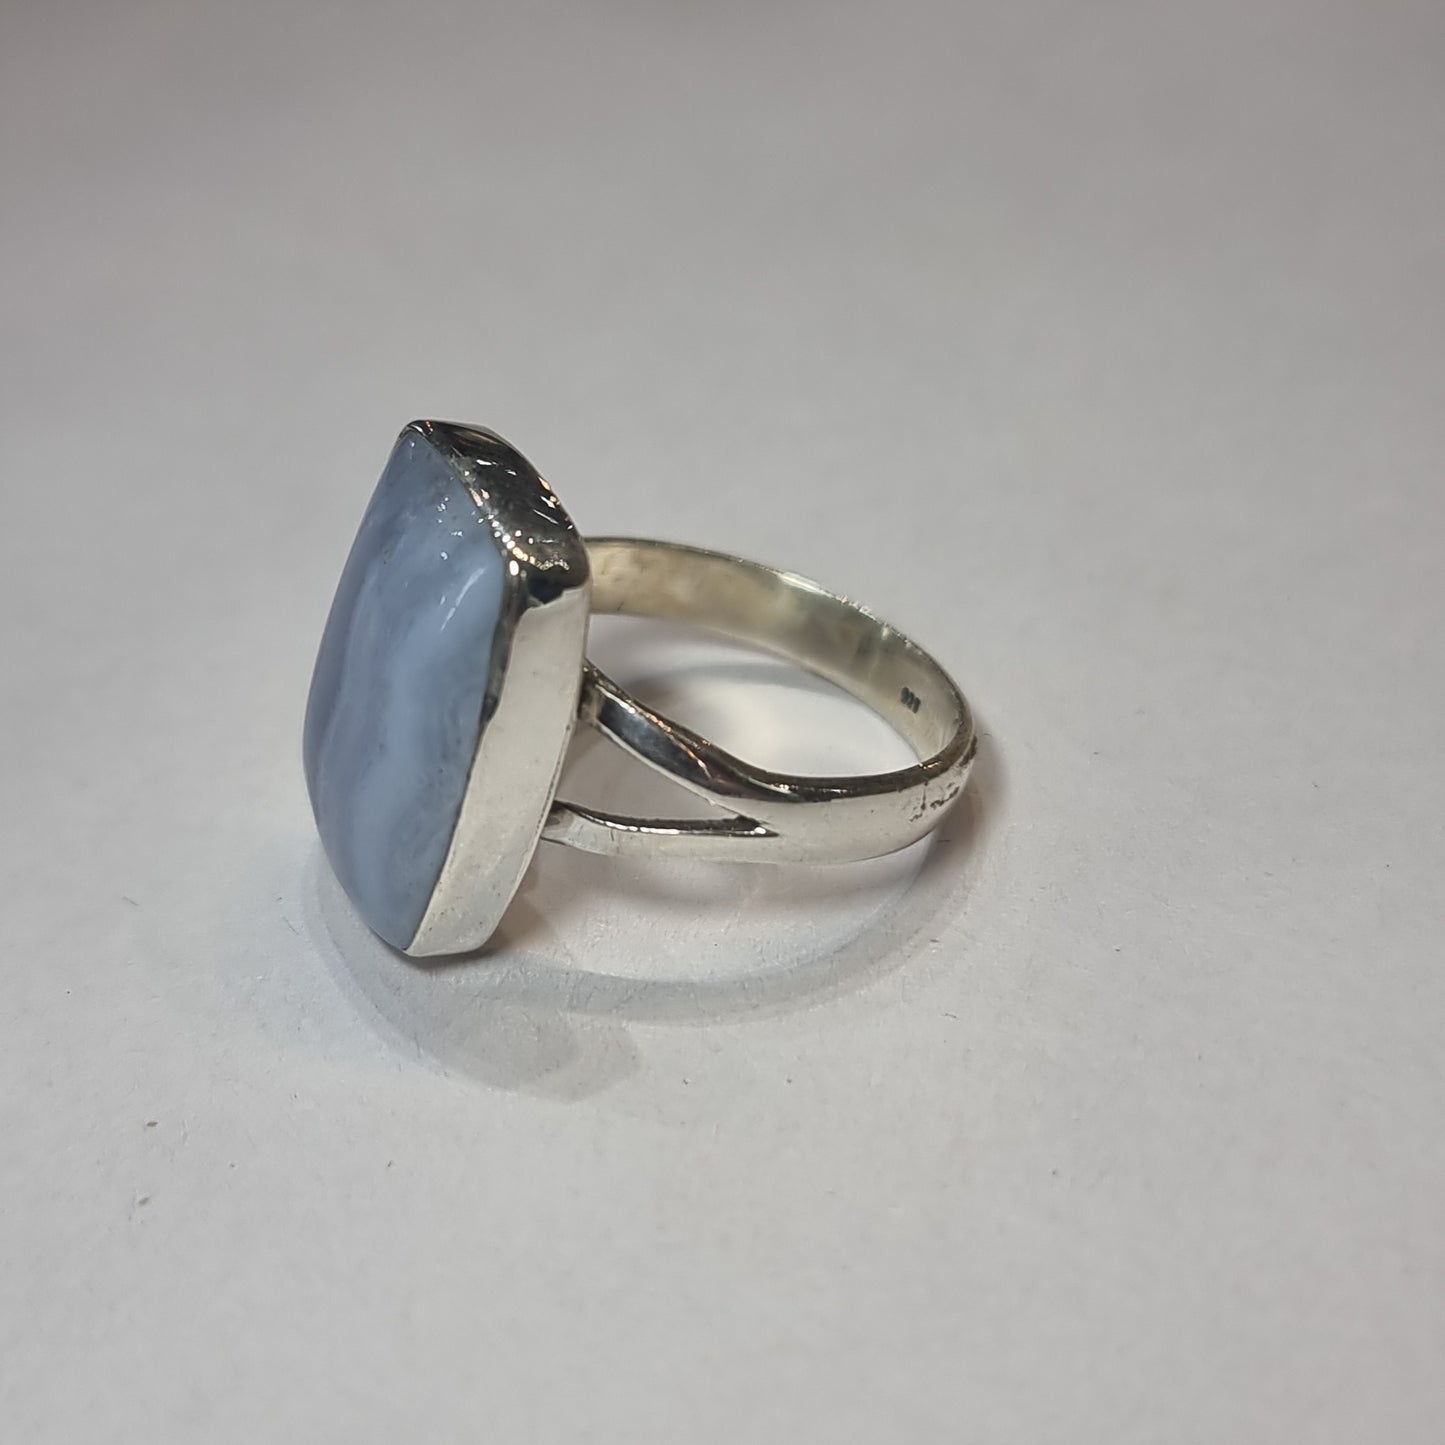 Blue lace agate ring - Rivendell Shop